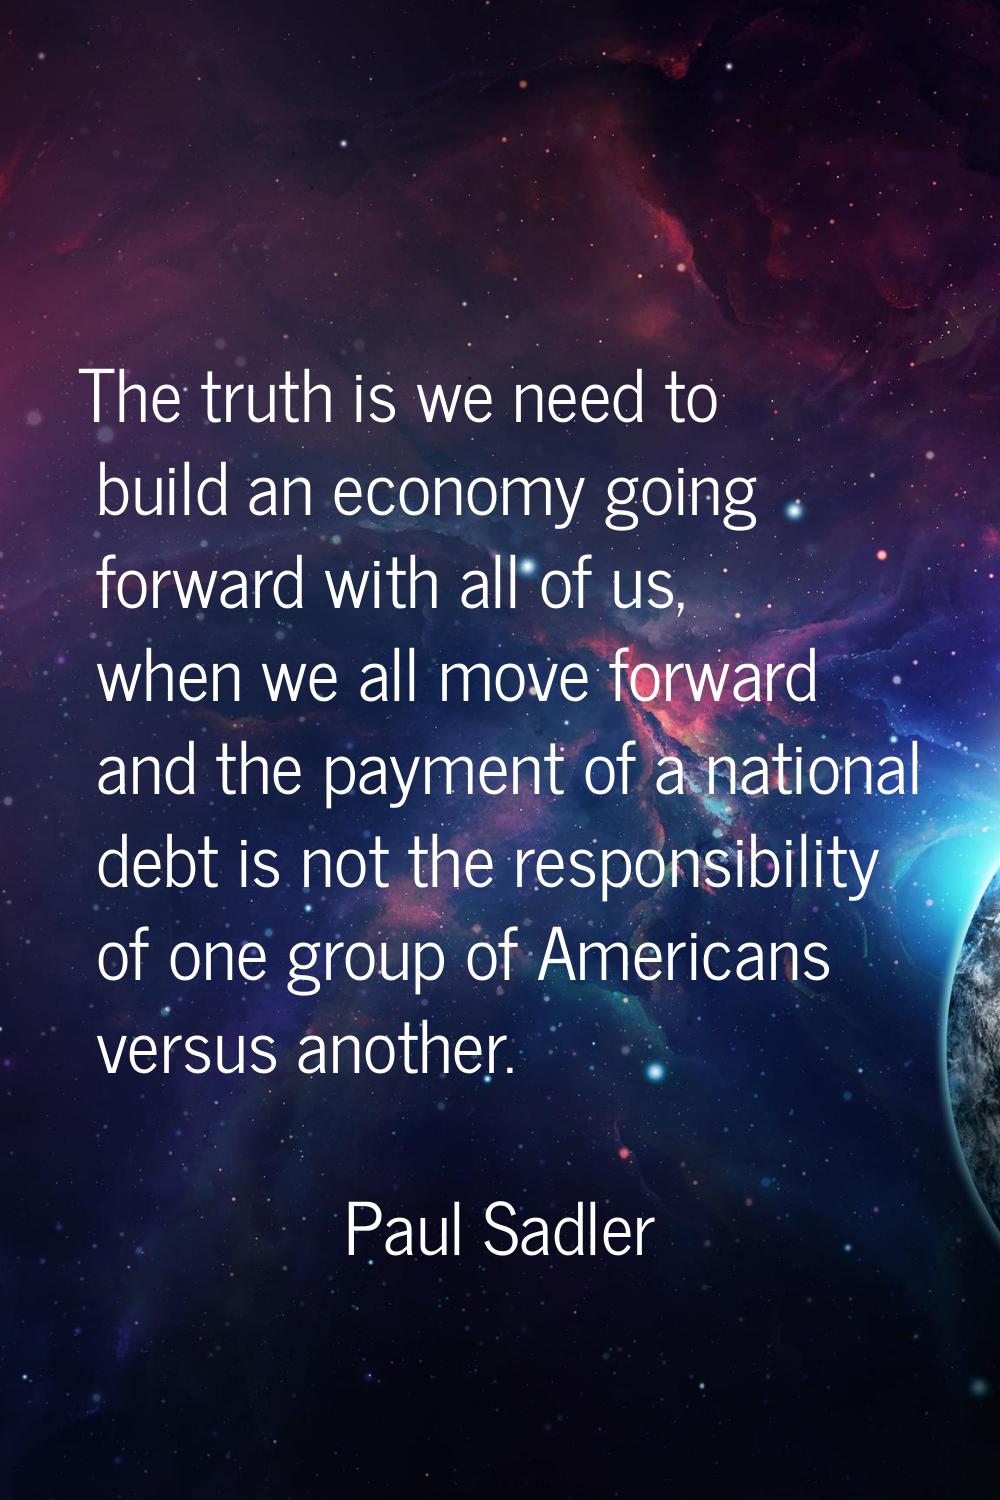 The truth is we need to build an economy going forward with all of us, when we all move forward and